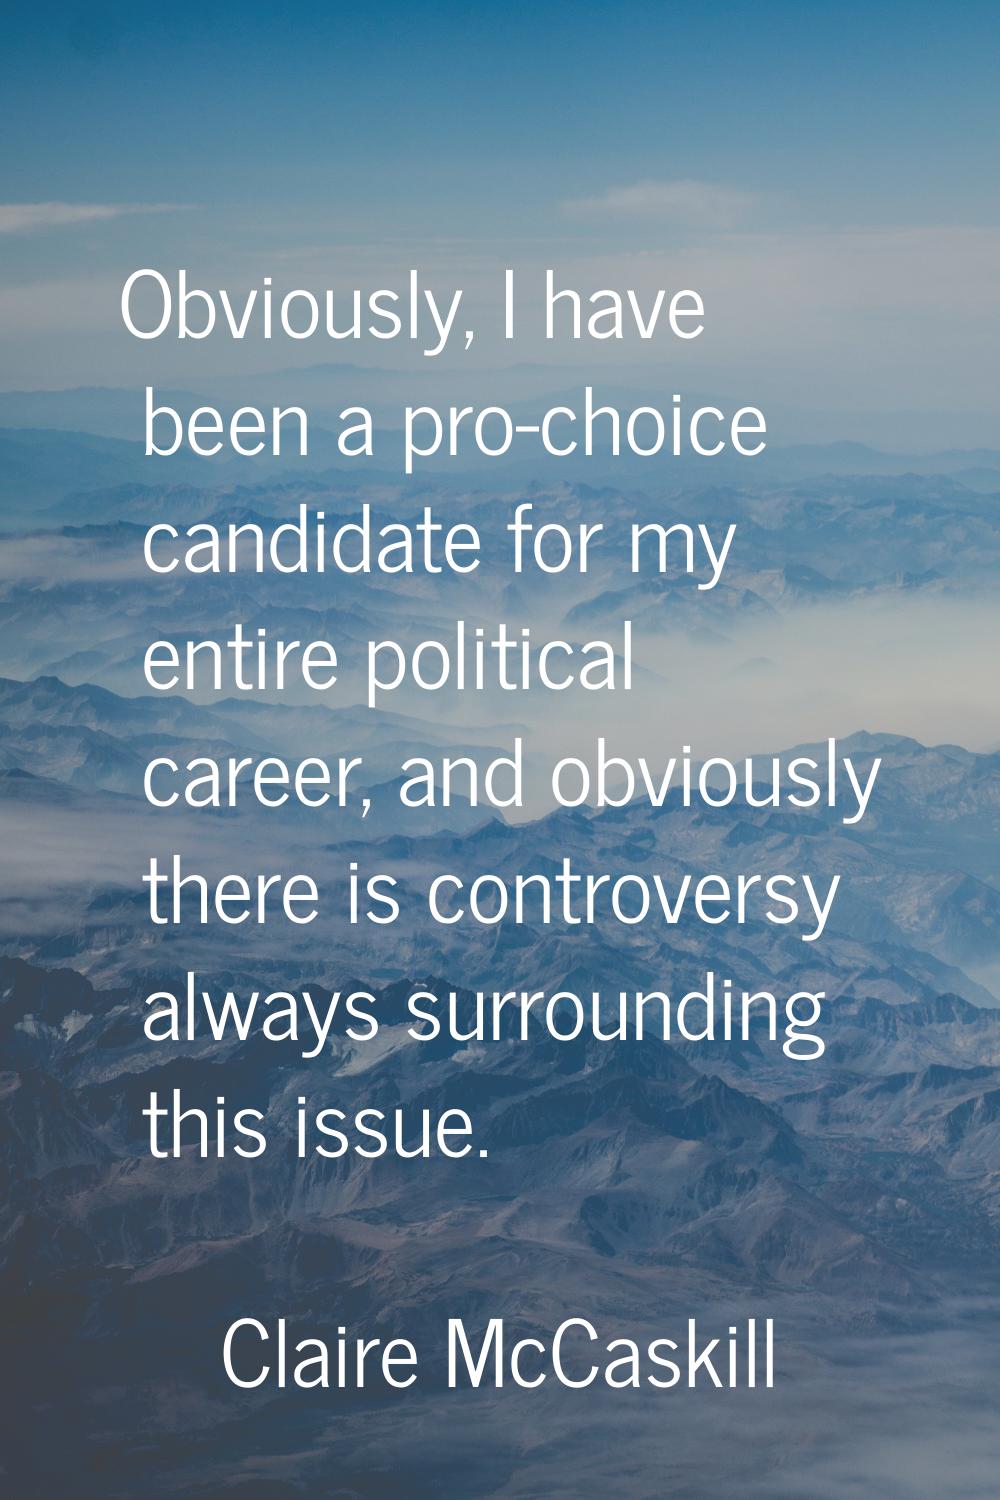 Obviously, I have been a pro-choice candidate for my entire political career, and obviously there i